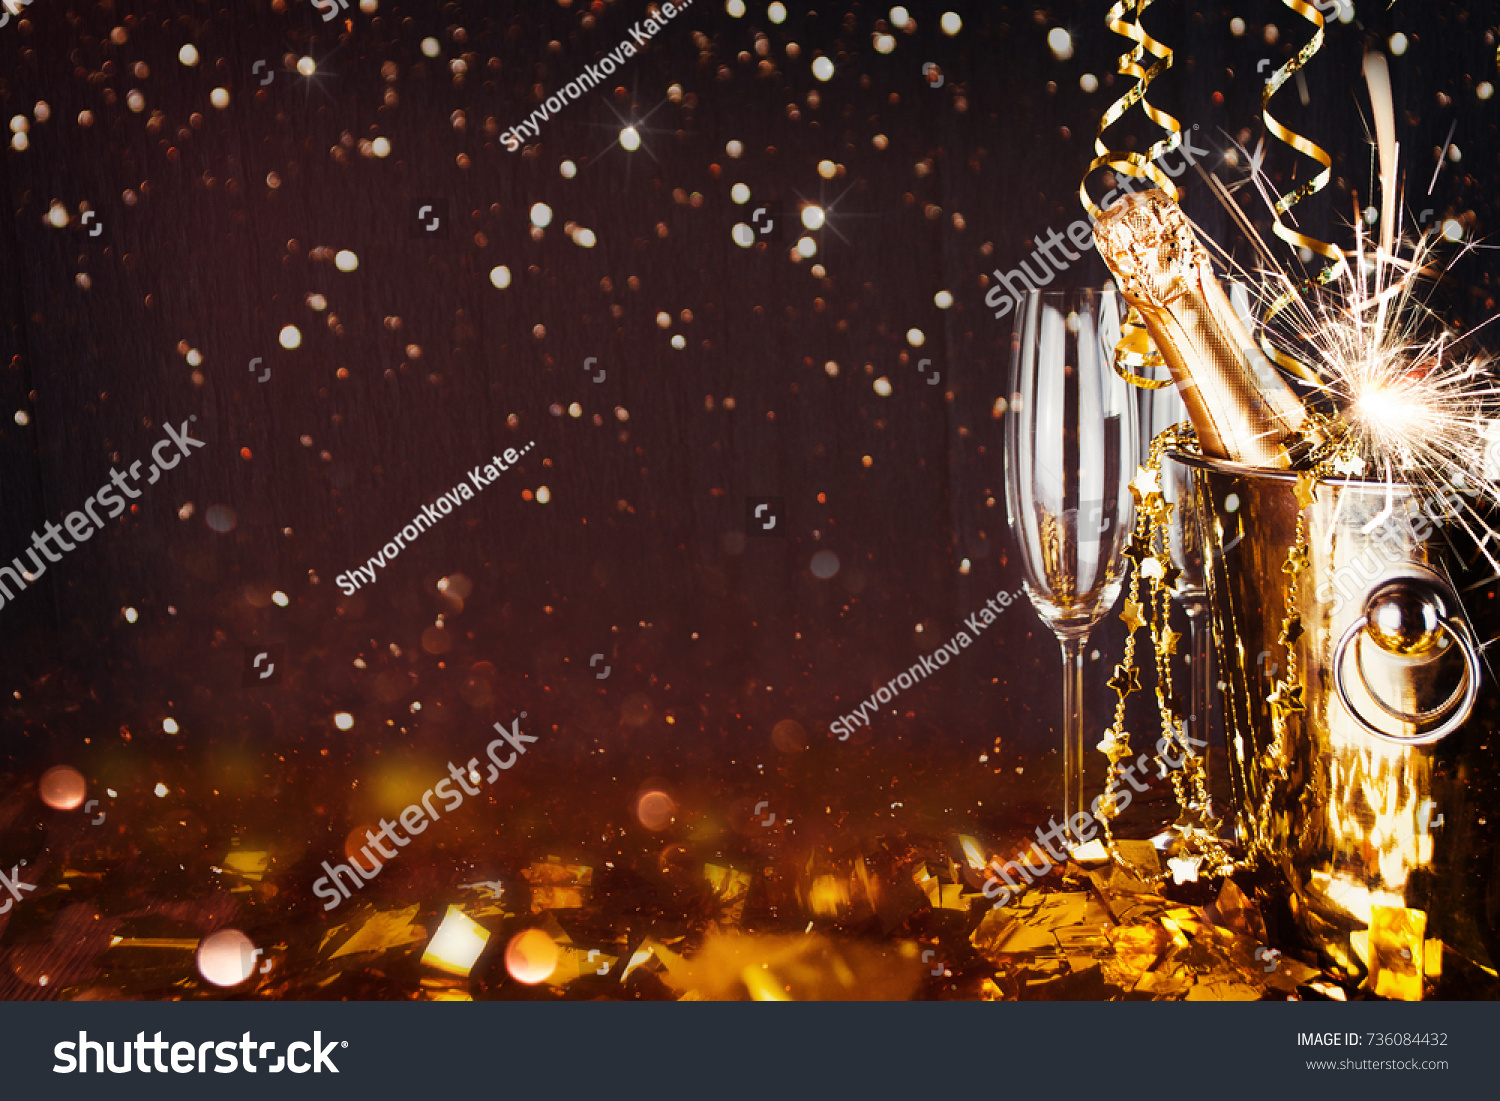 Sparkling New Year background. Champagne Explosion With Toast Of Flutes #736084432